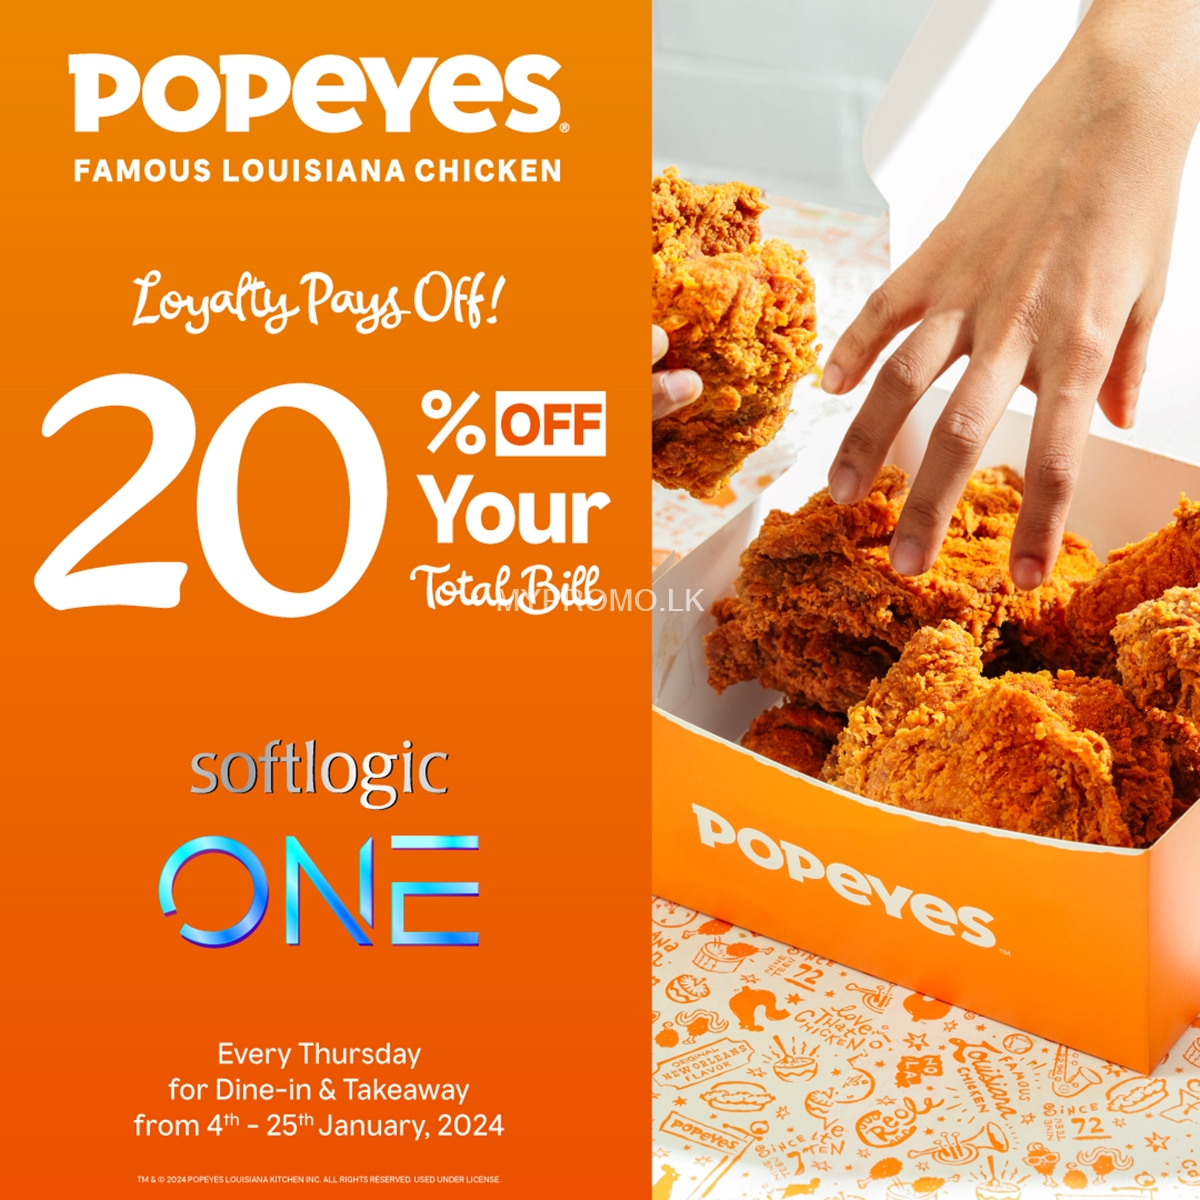 Exclusive Offer for Softlogic loyalty customers on Thursdays at Popeyes